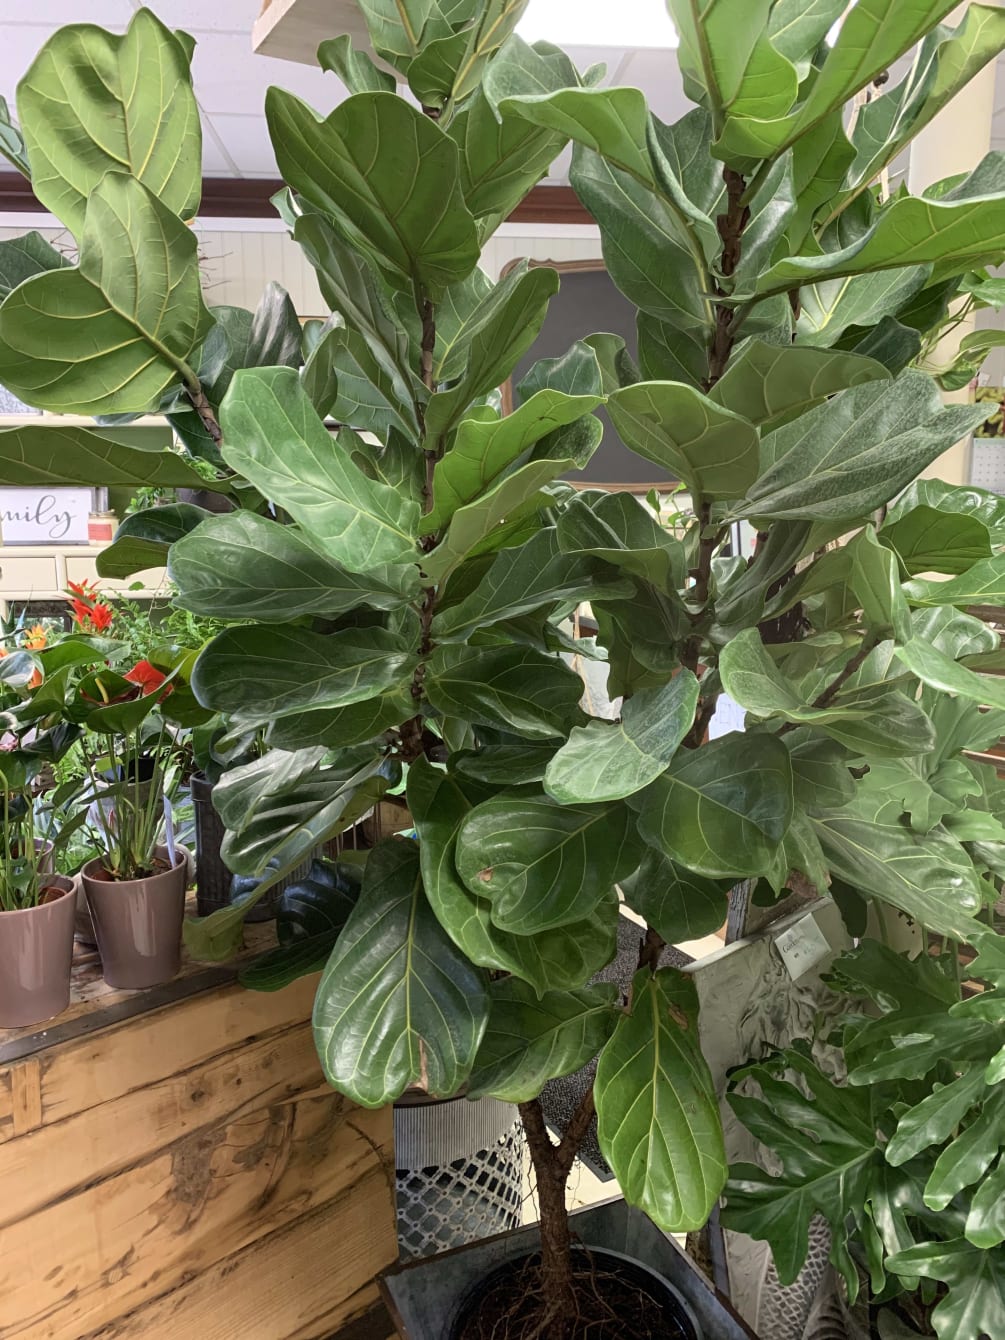 One of our favorites! This amazing foliage plant will liven any living